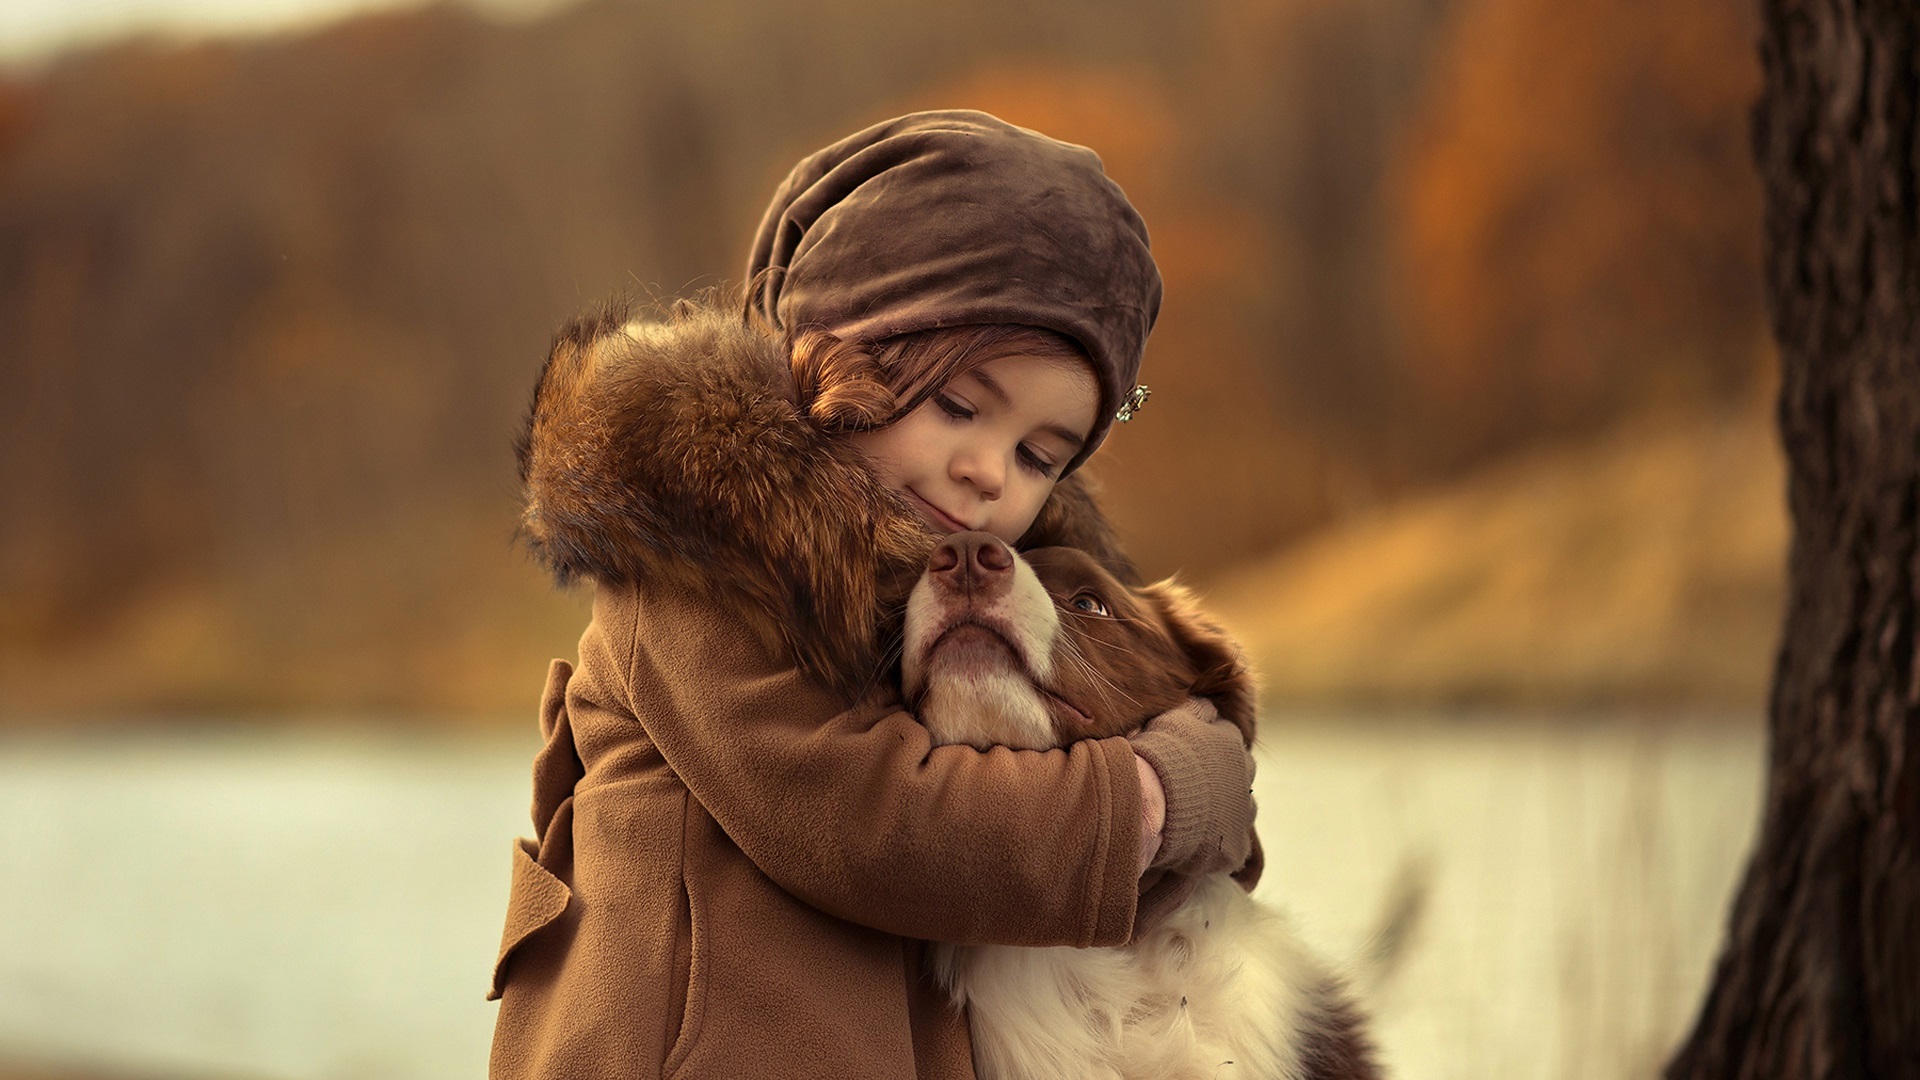 Wallpaper Cute child girl hug a dog 1920x1200 HD Picture, Image